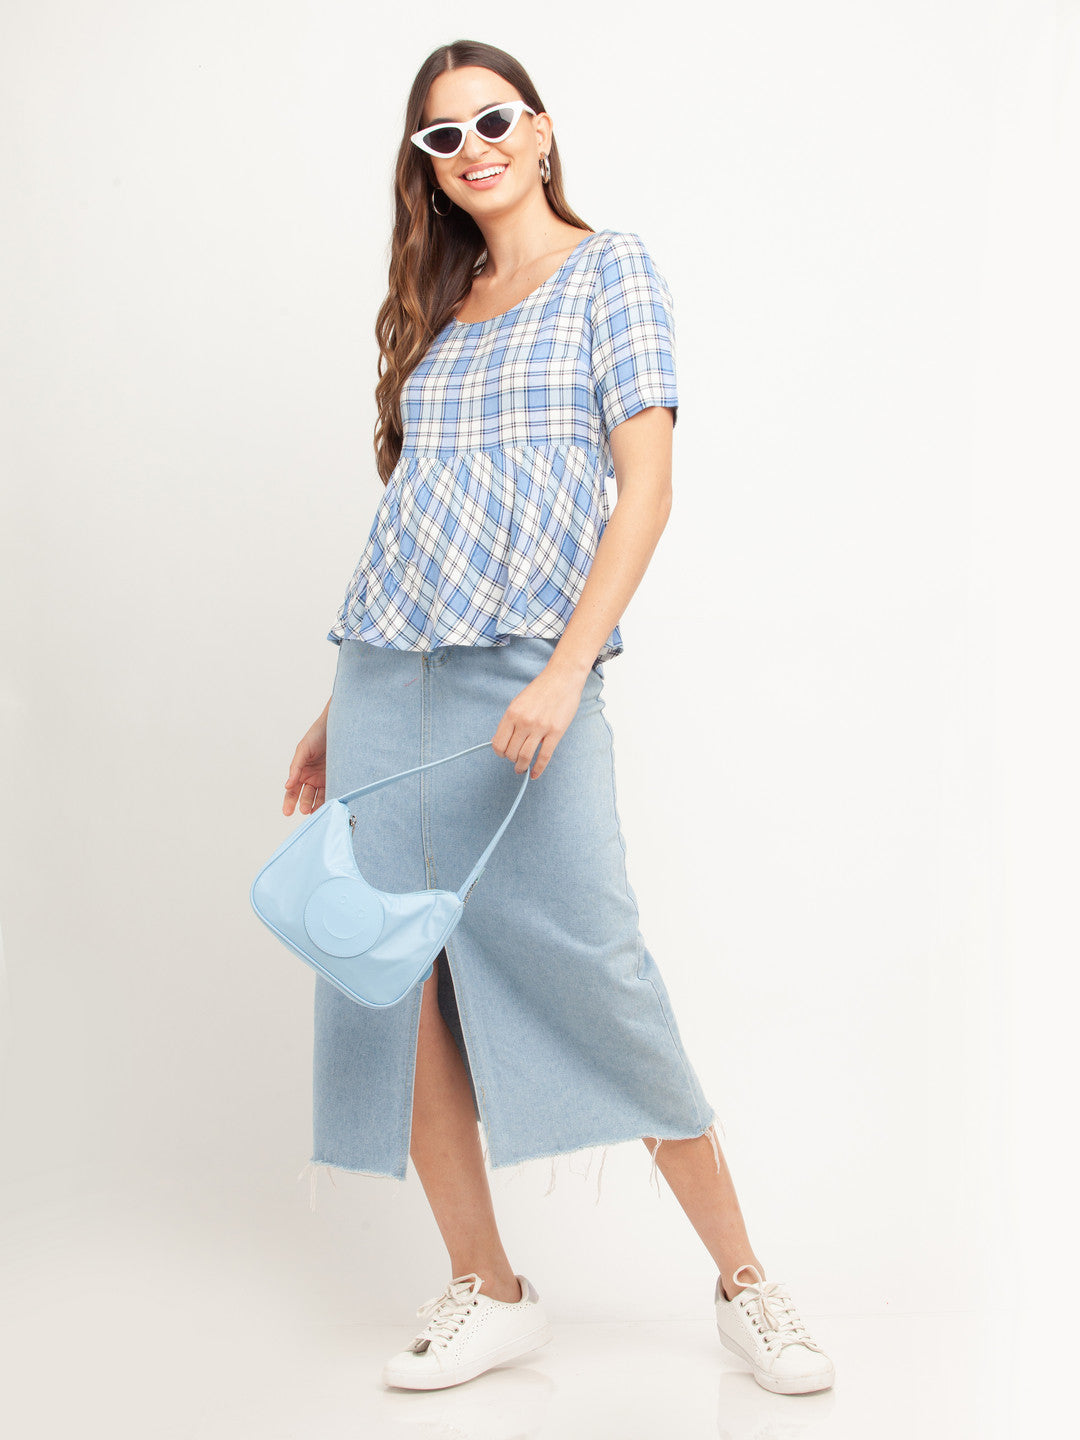 Blue Checked Tie-Up Top For Women